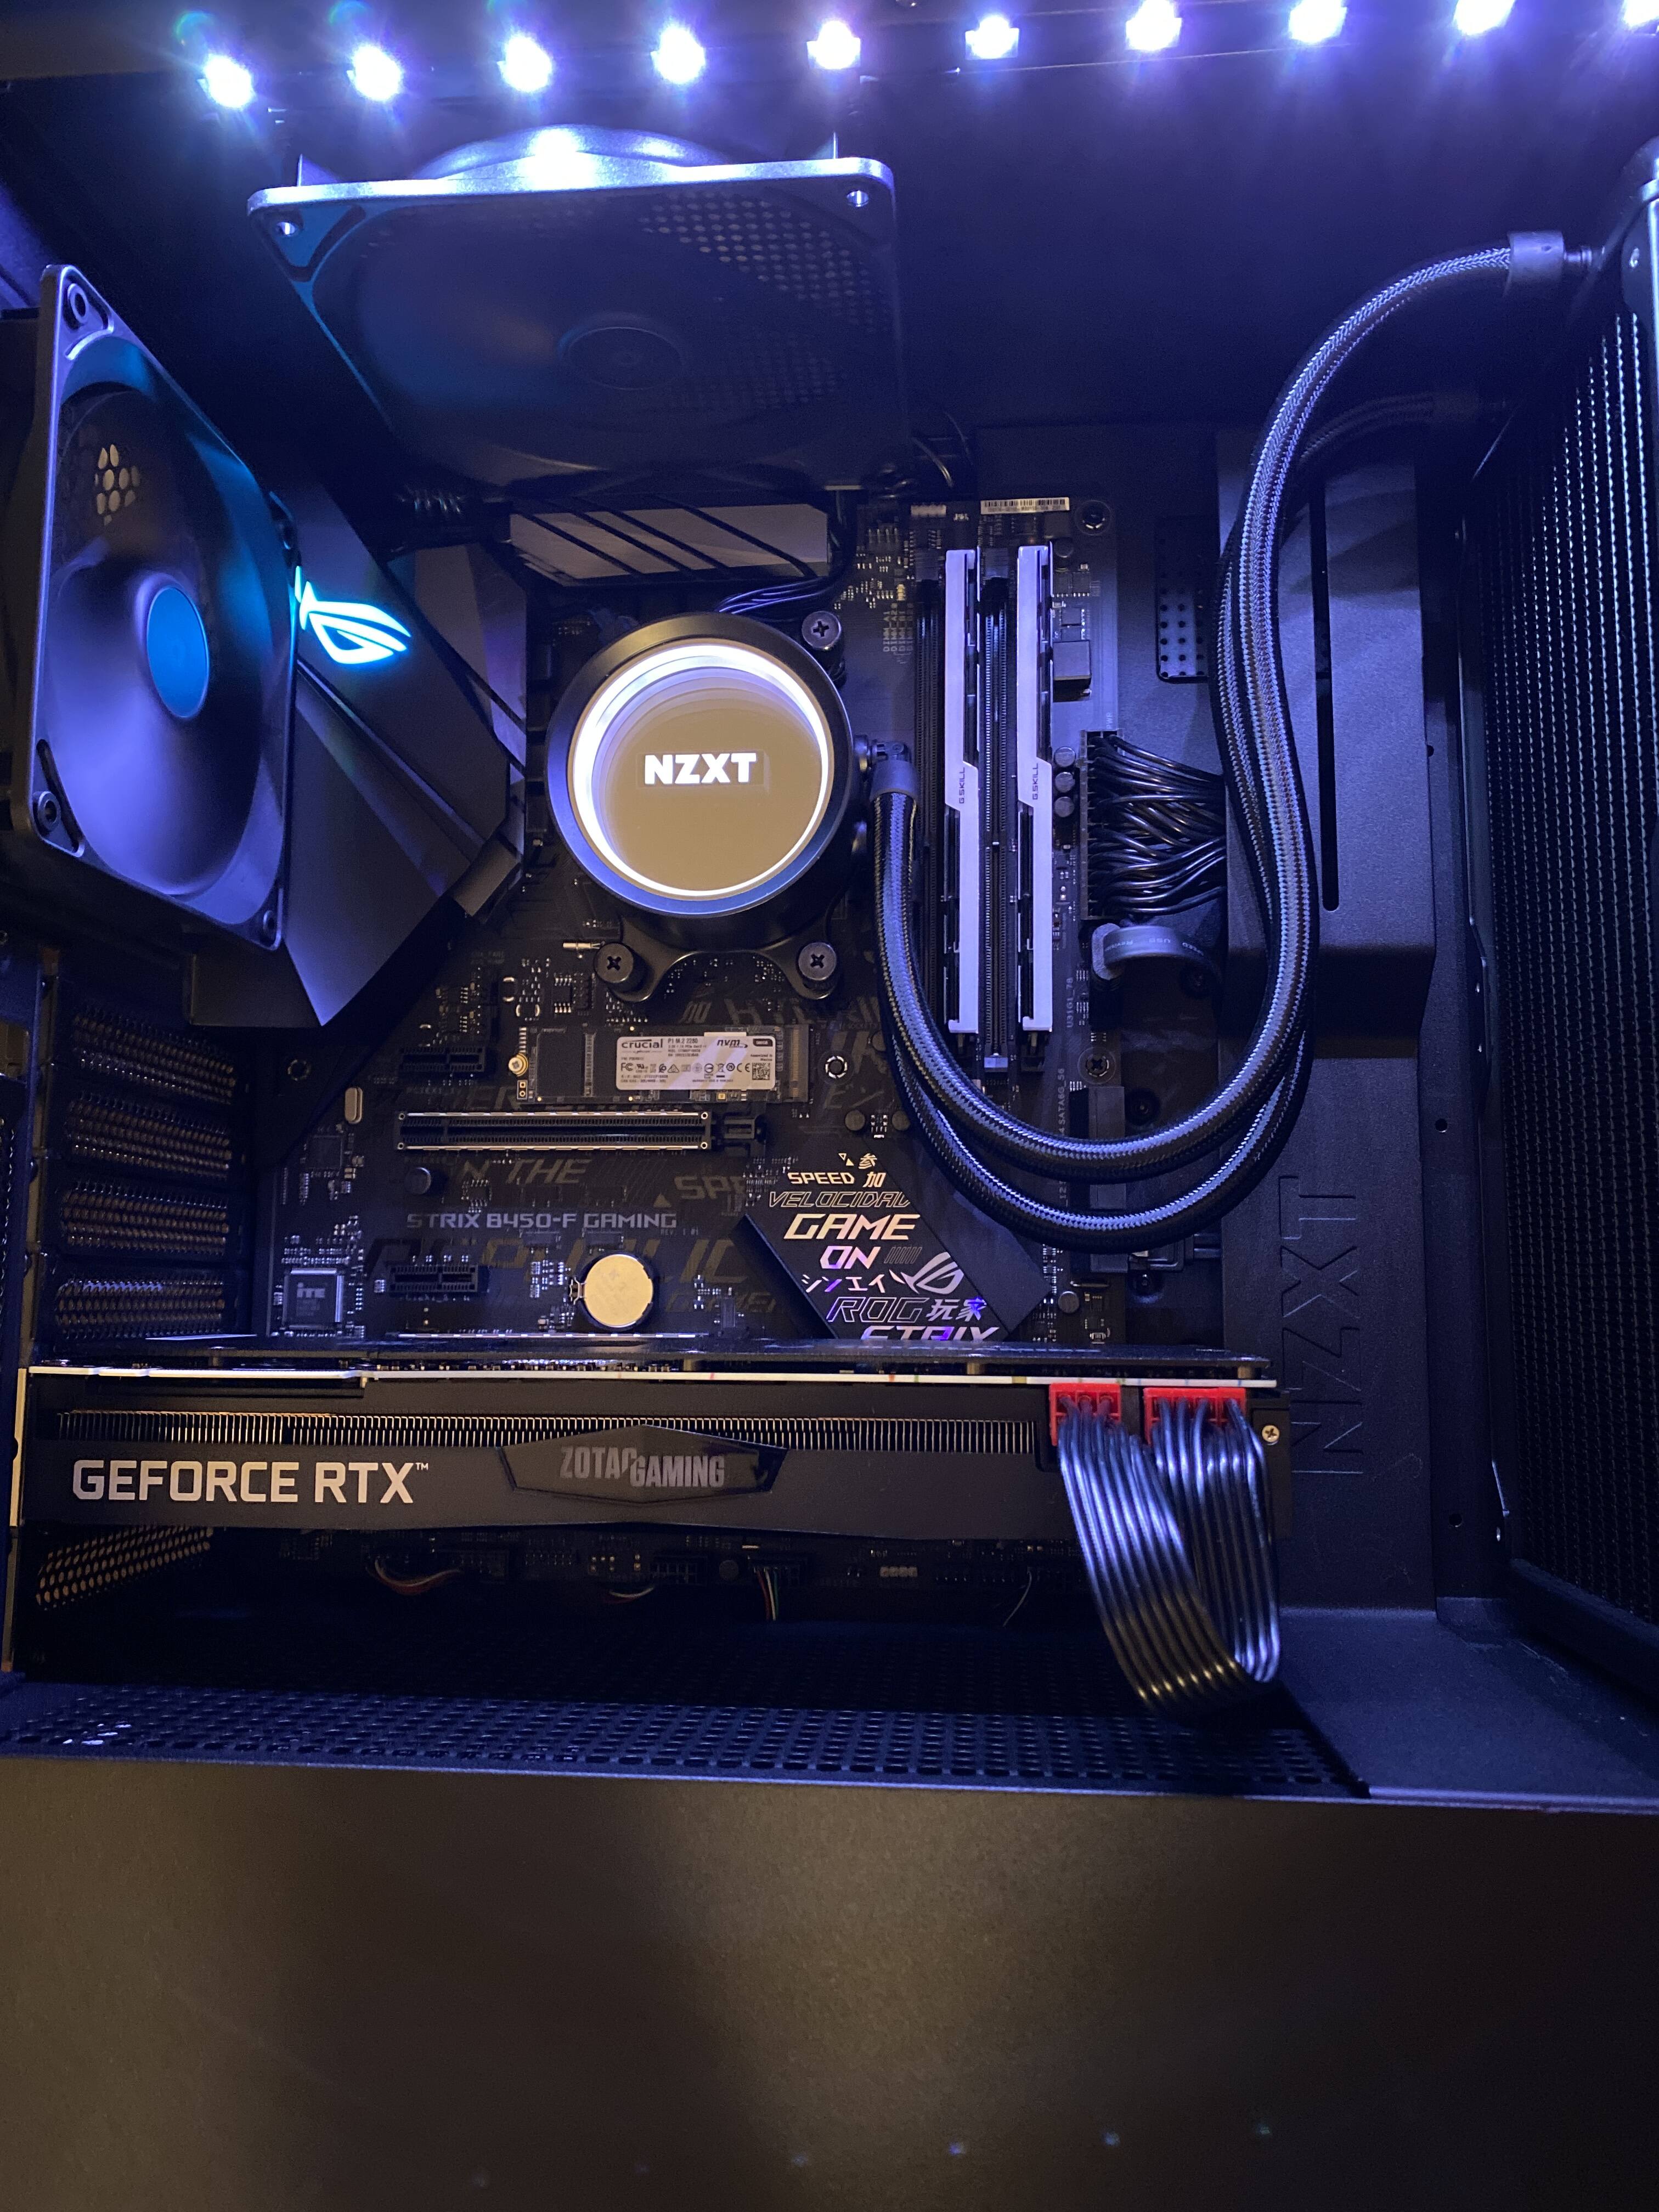 Strix B450 F Gaming Will Not Post Has No Diagnostic Leds Lit And Gpu Fans And Rgb Not Working Troubleshooting Linus Tech Tips